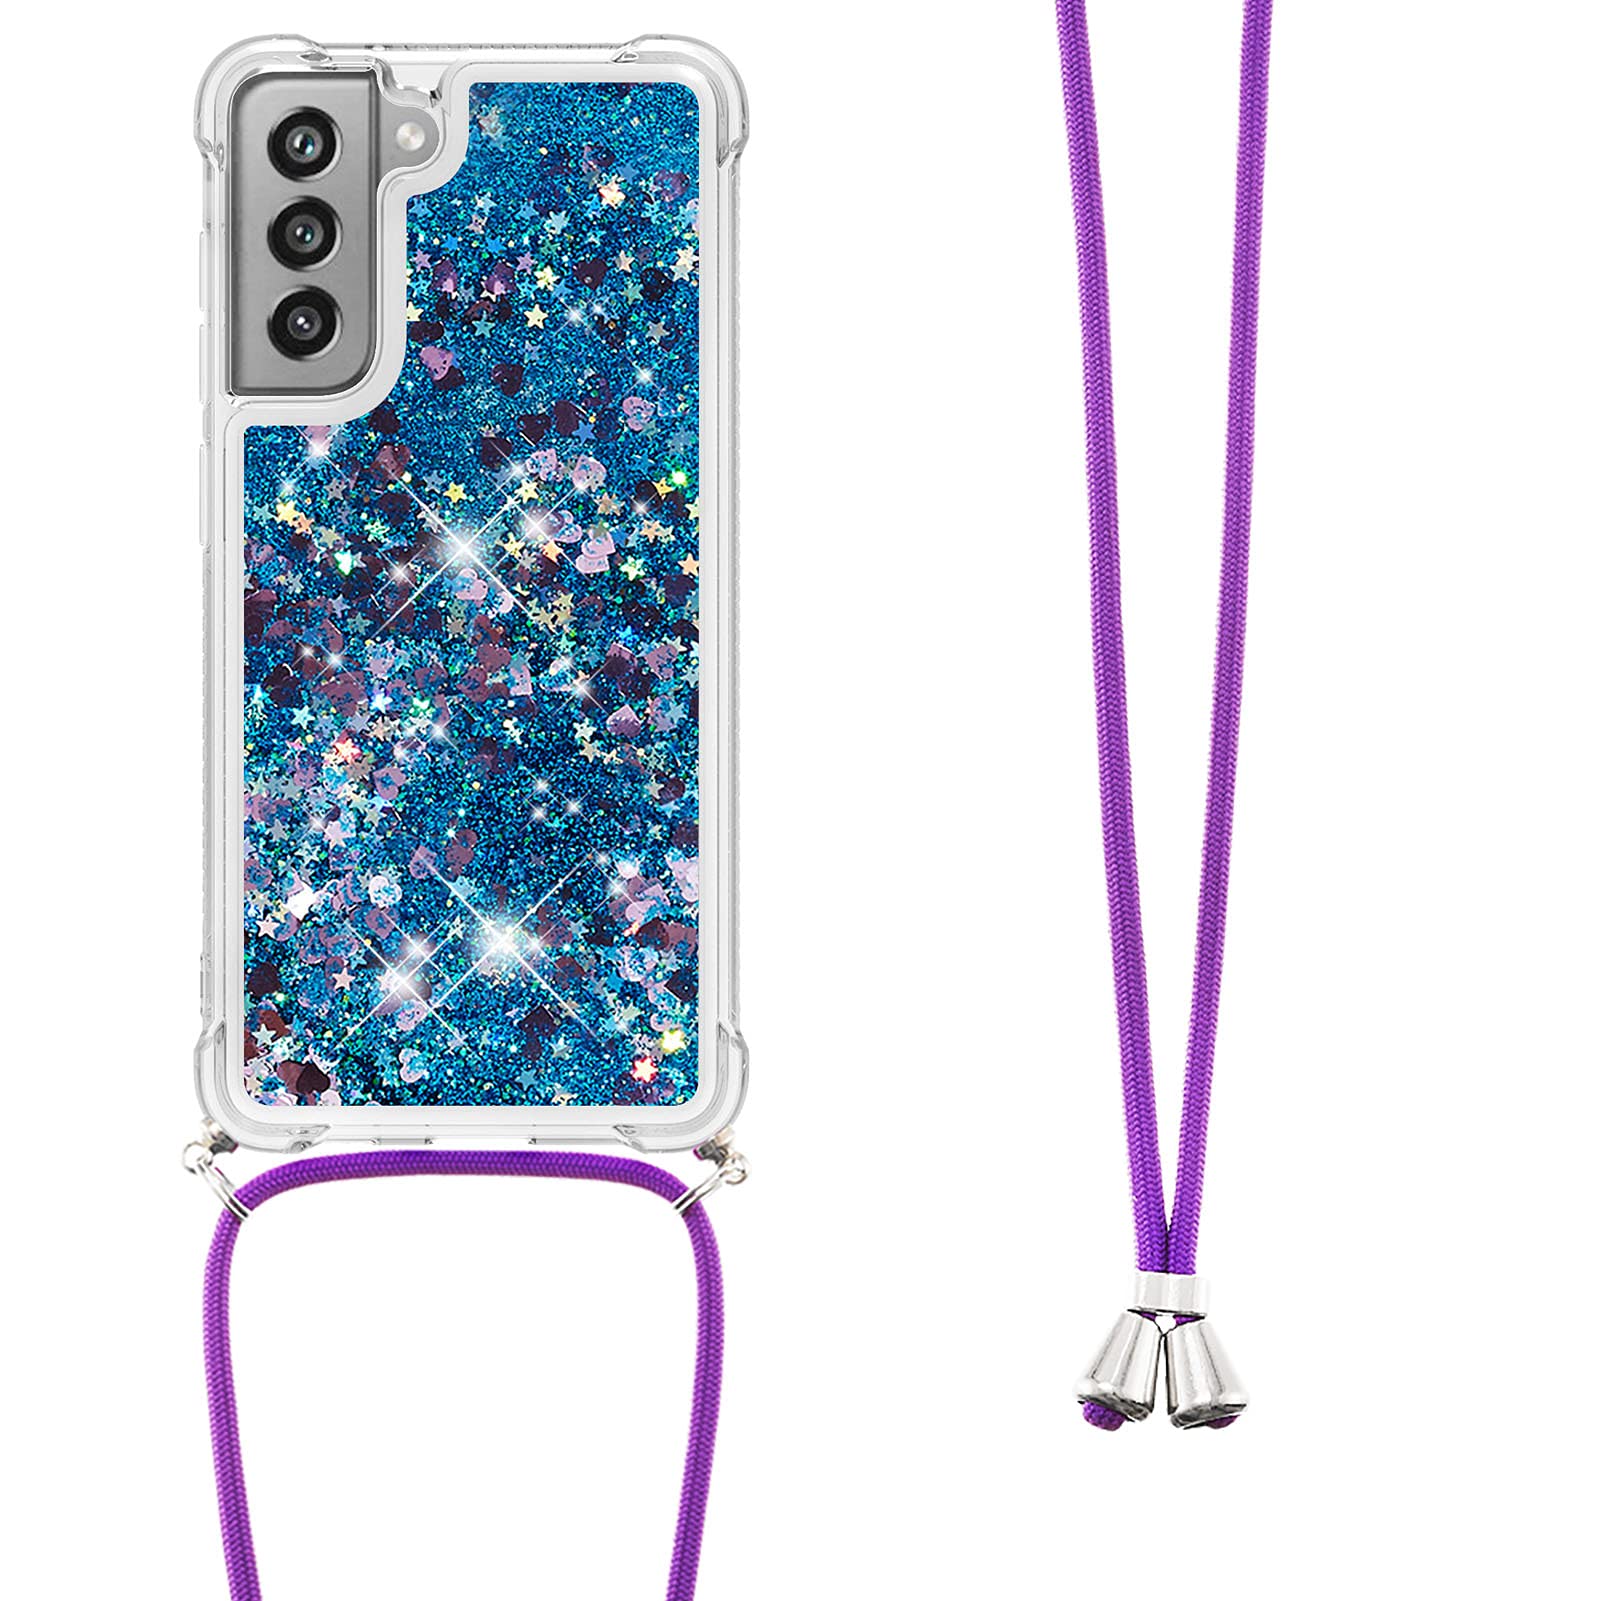 Asuwish Phone Case for Samsung Galaxy S21 FE 5G with Screen Protector and Crossbody Strap Bling Liquid Glitter Clear Slim Protective Cell Cover S 21 EF S21FE5G UW S21FE 21S G5 6.4 inch Women Blue